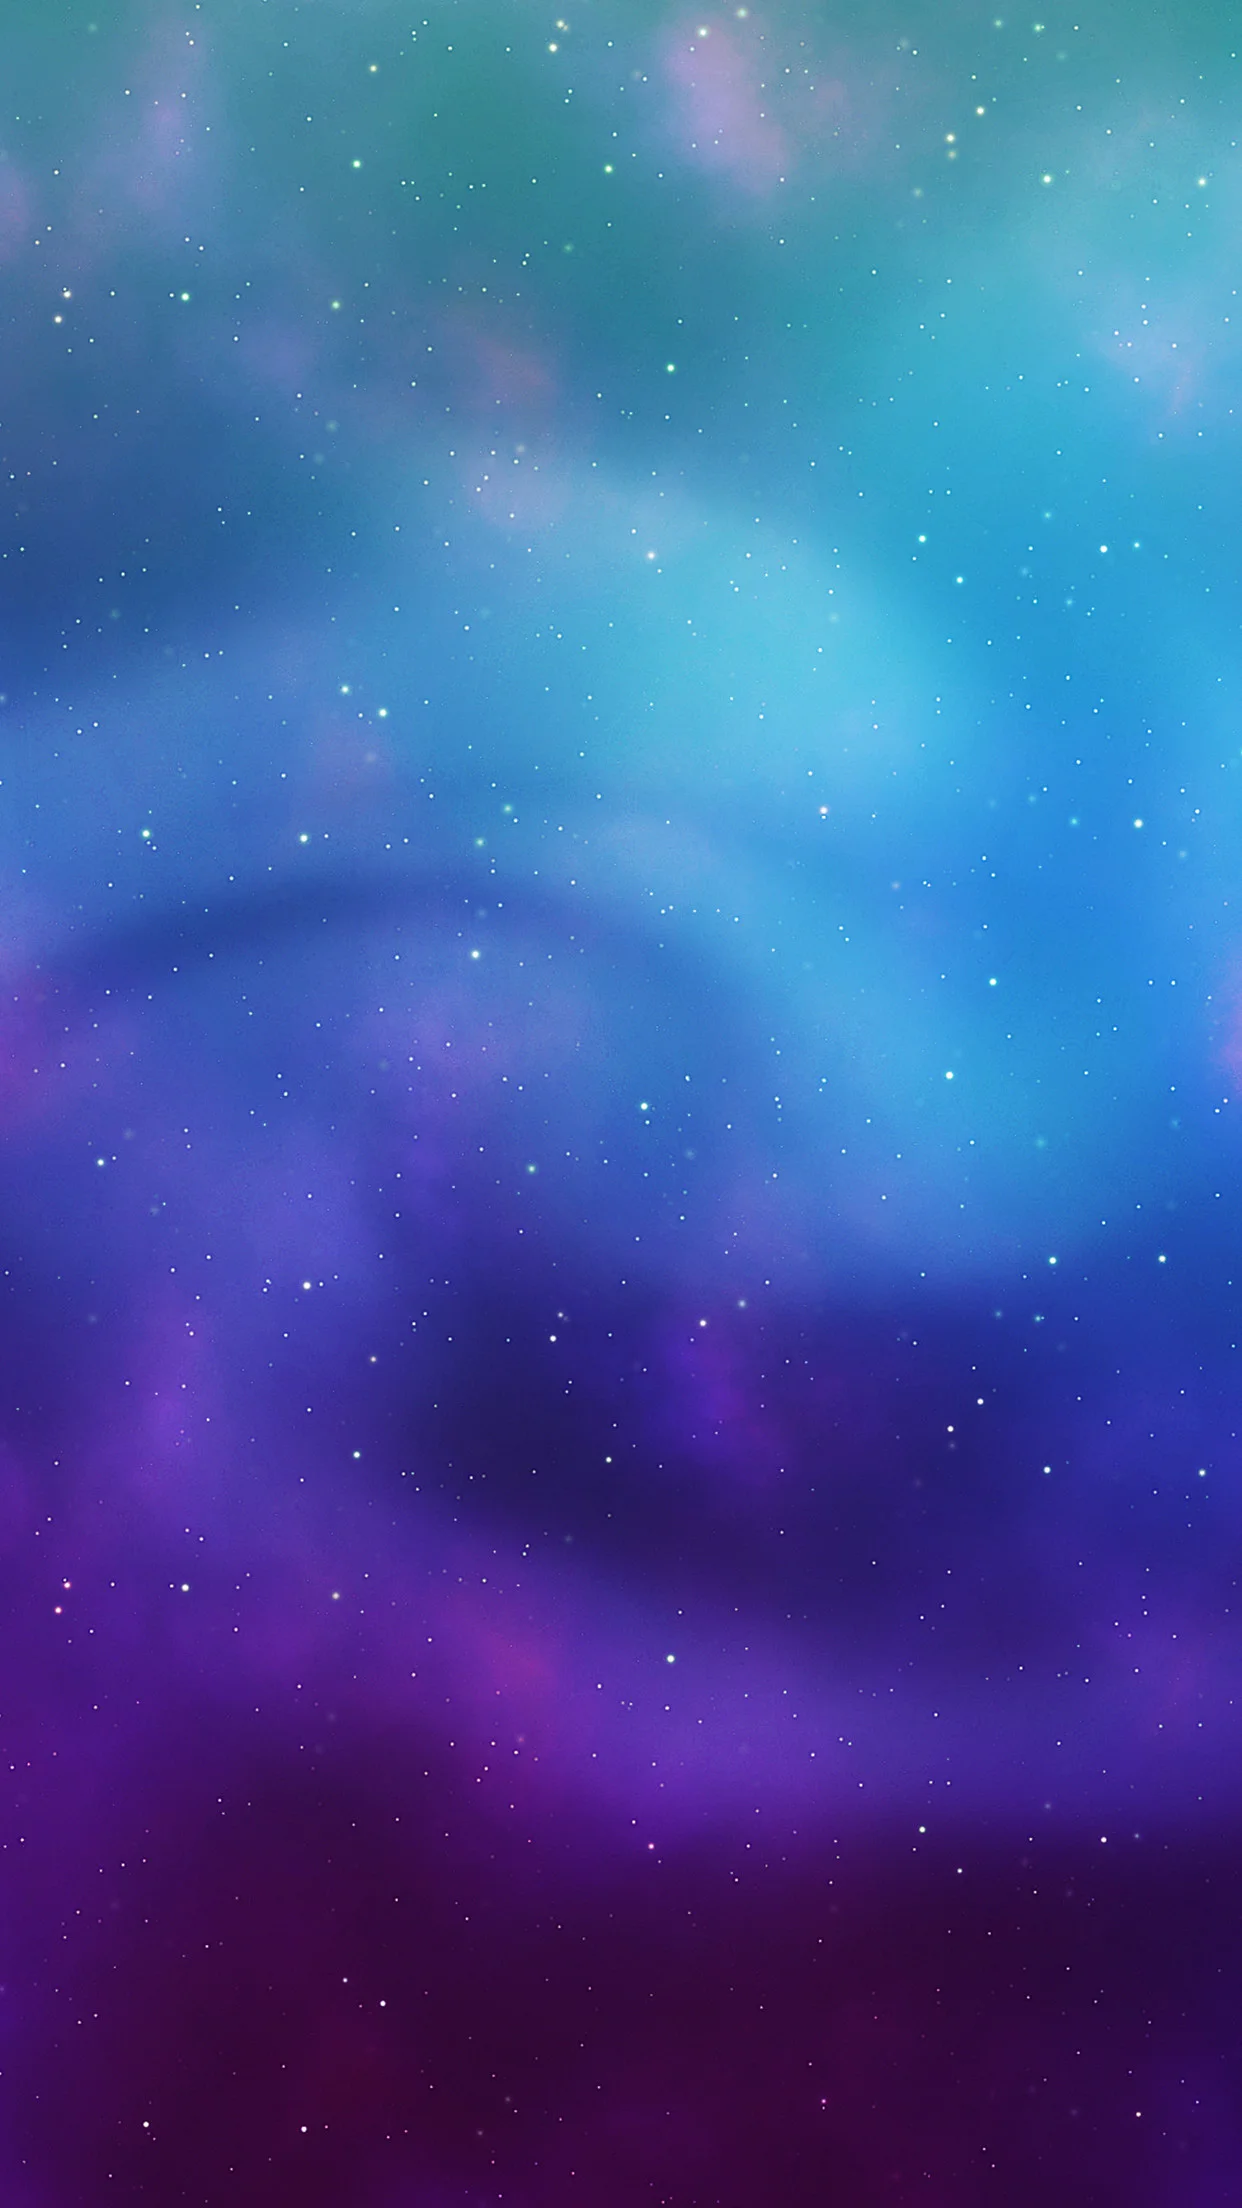 Wallpaper Atmosphere Purple Astronomical Object Star Violet Background   Download Free Image